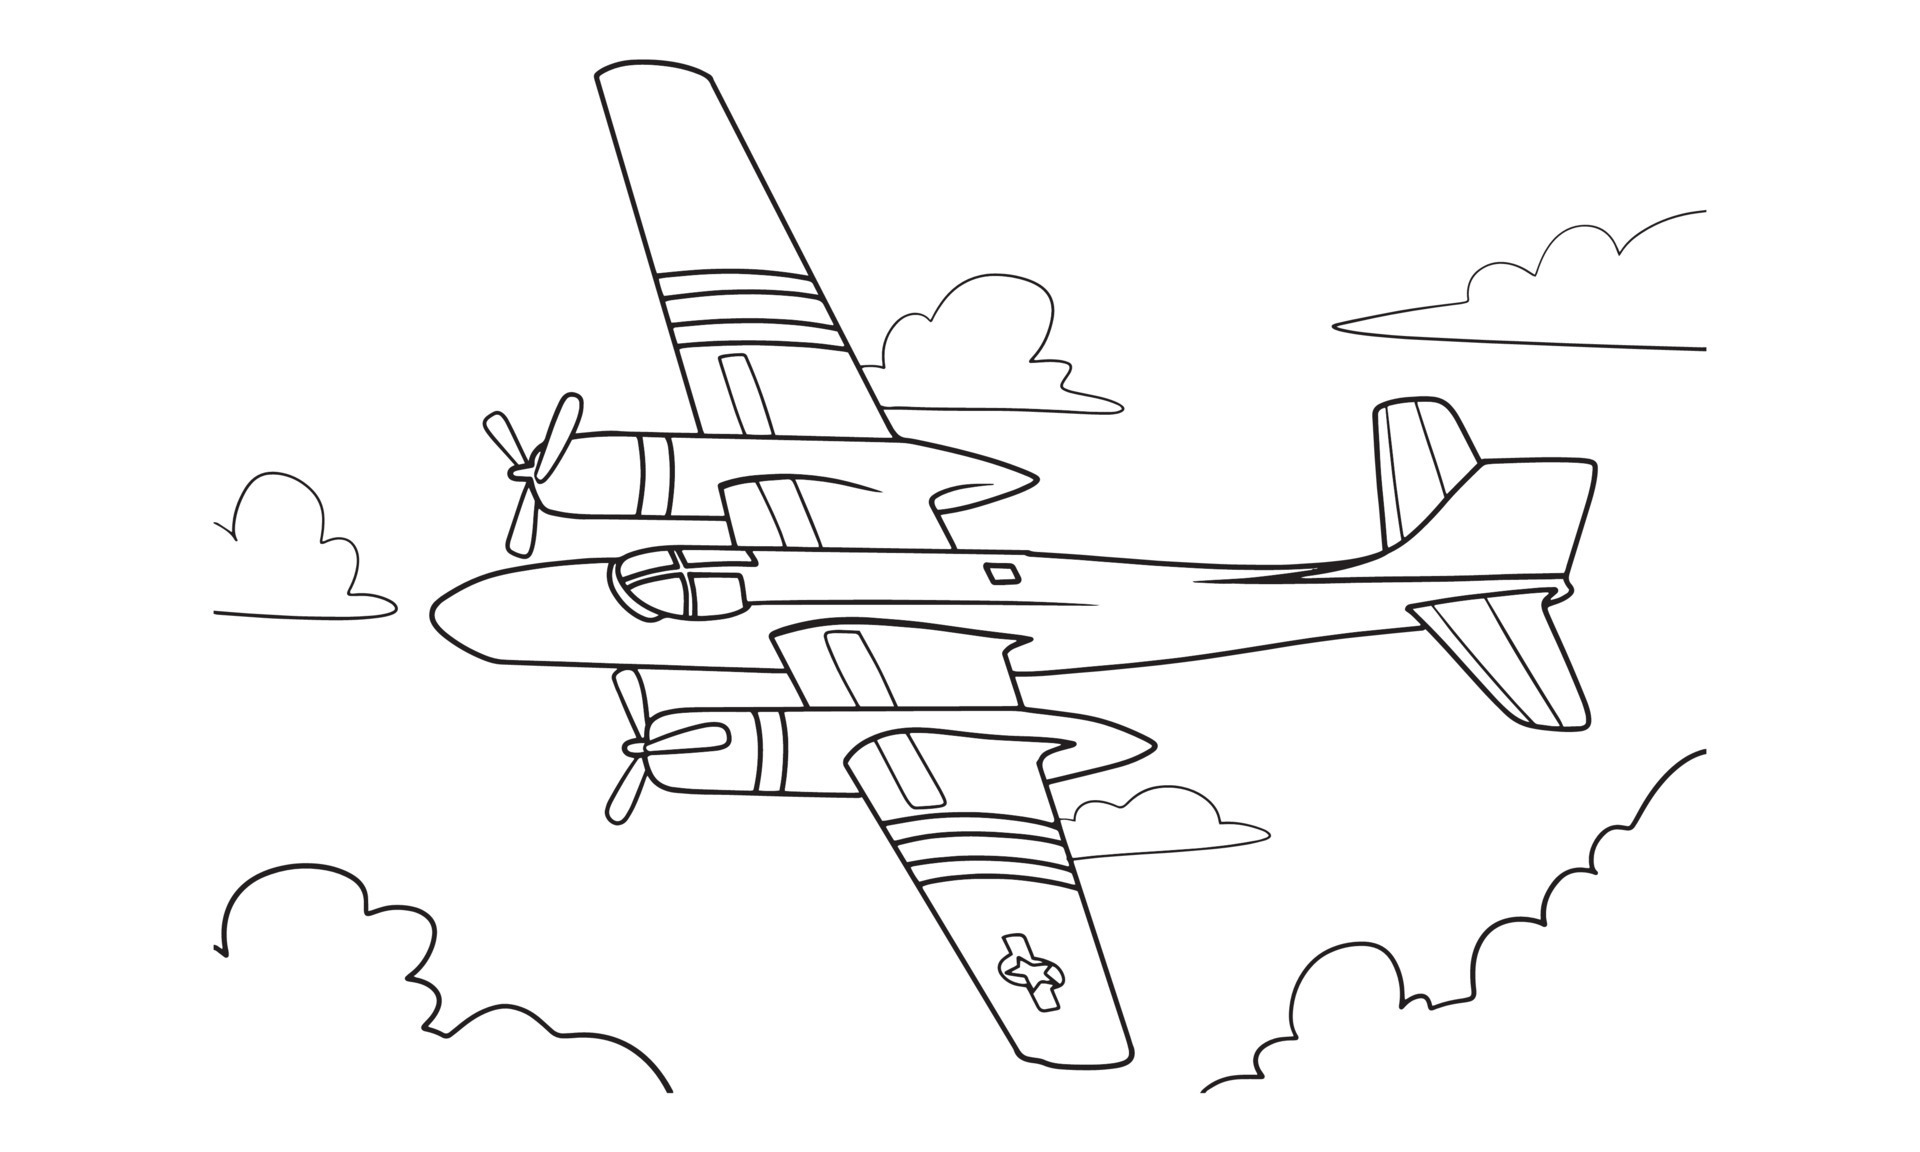 How to Draw Airplane Step by Step – For Kids & Beginners